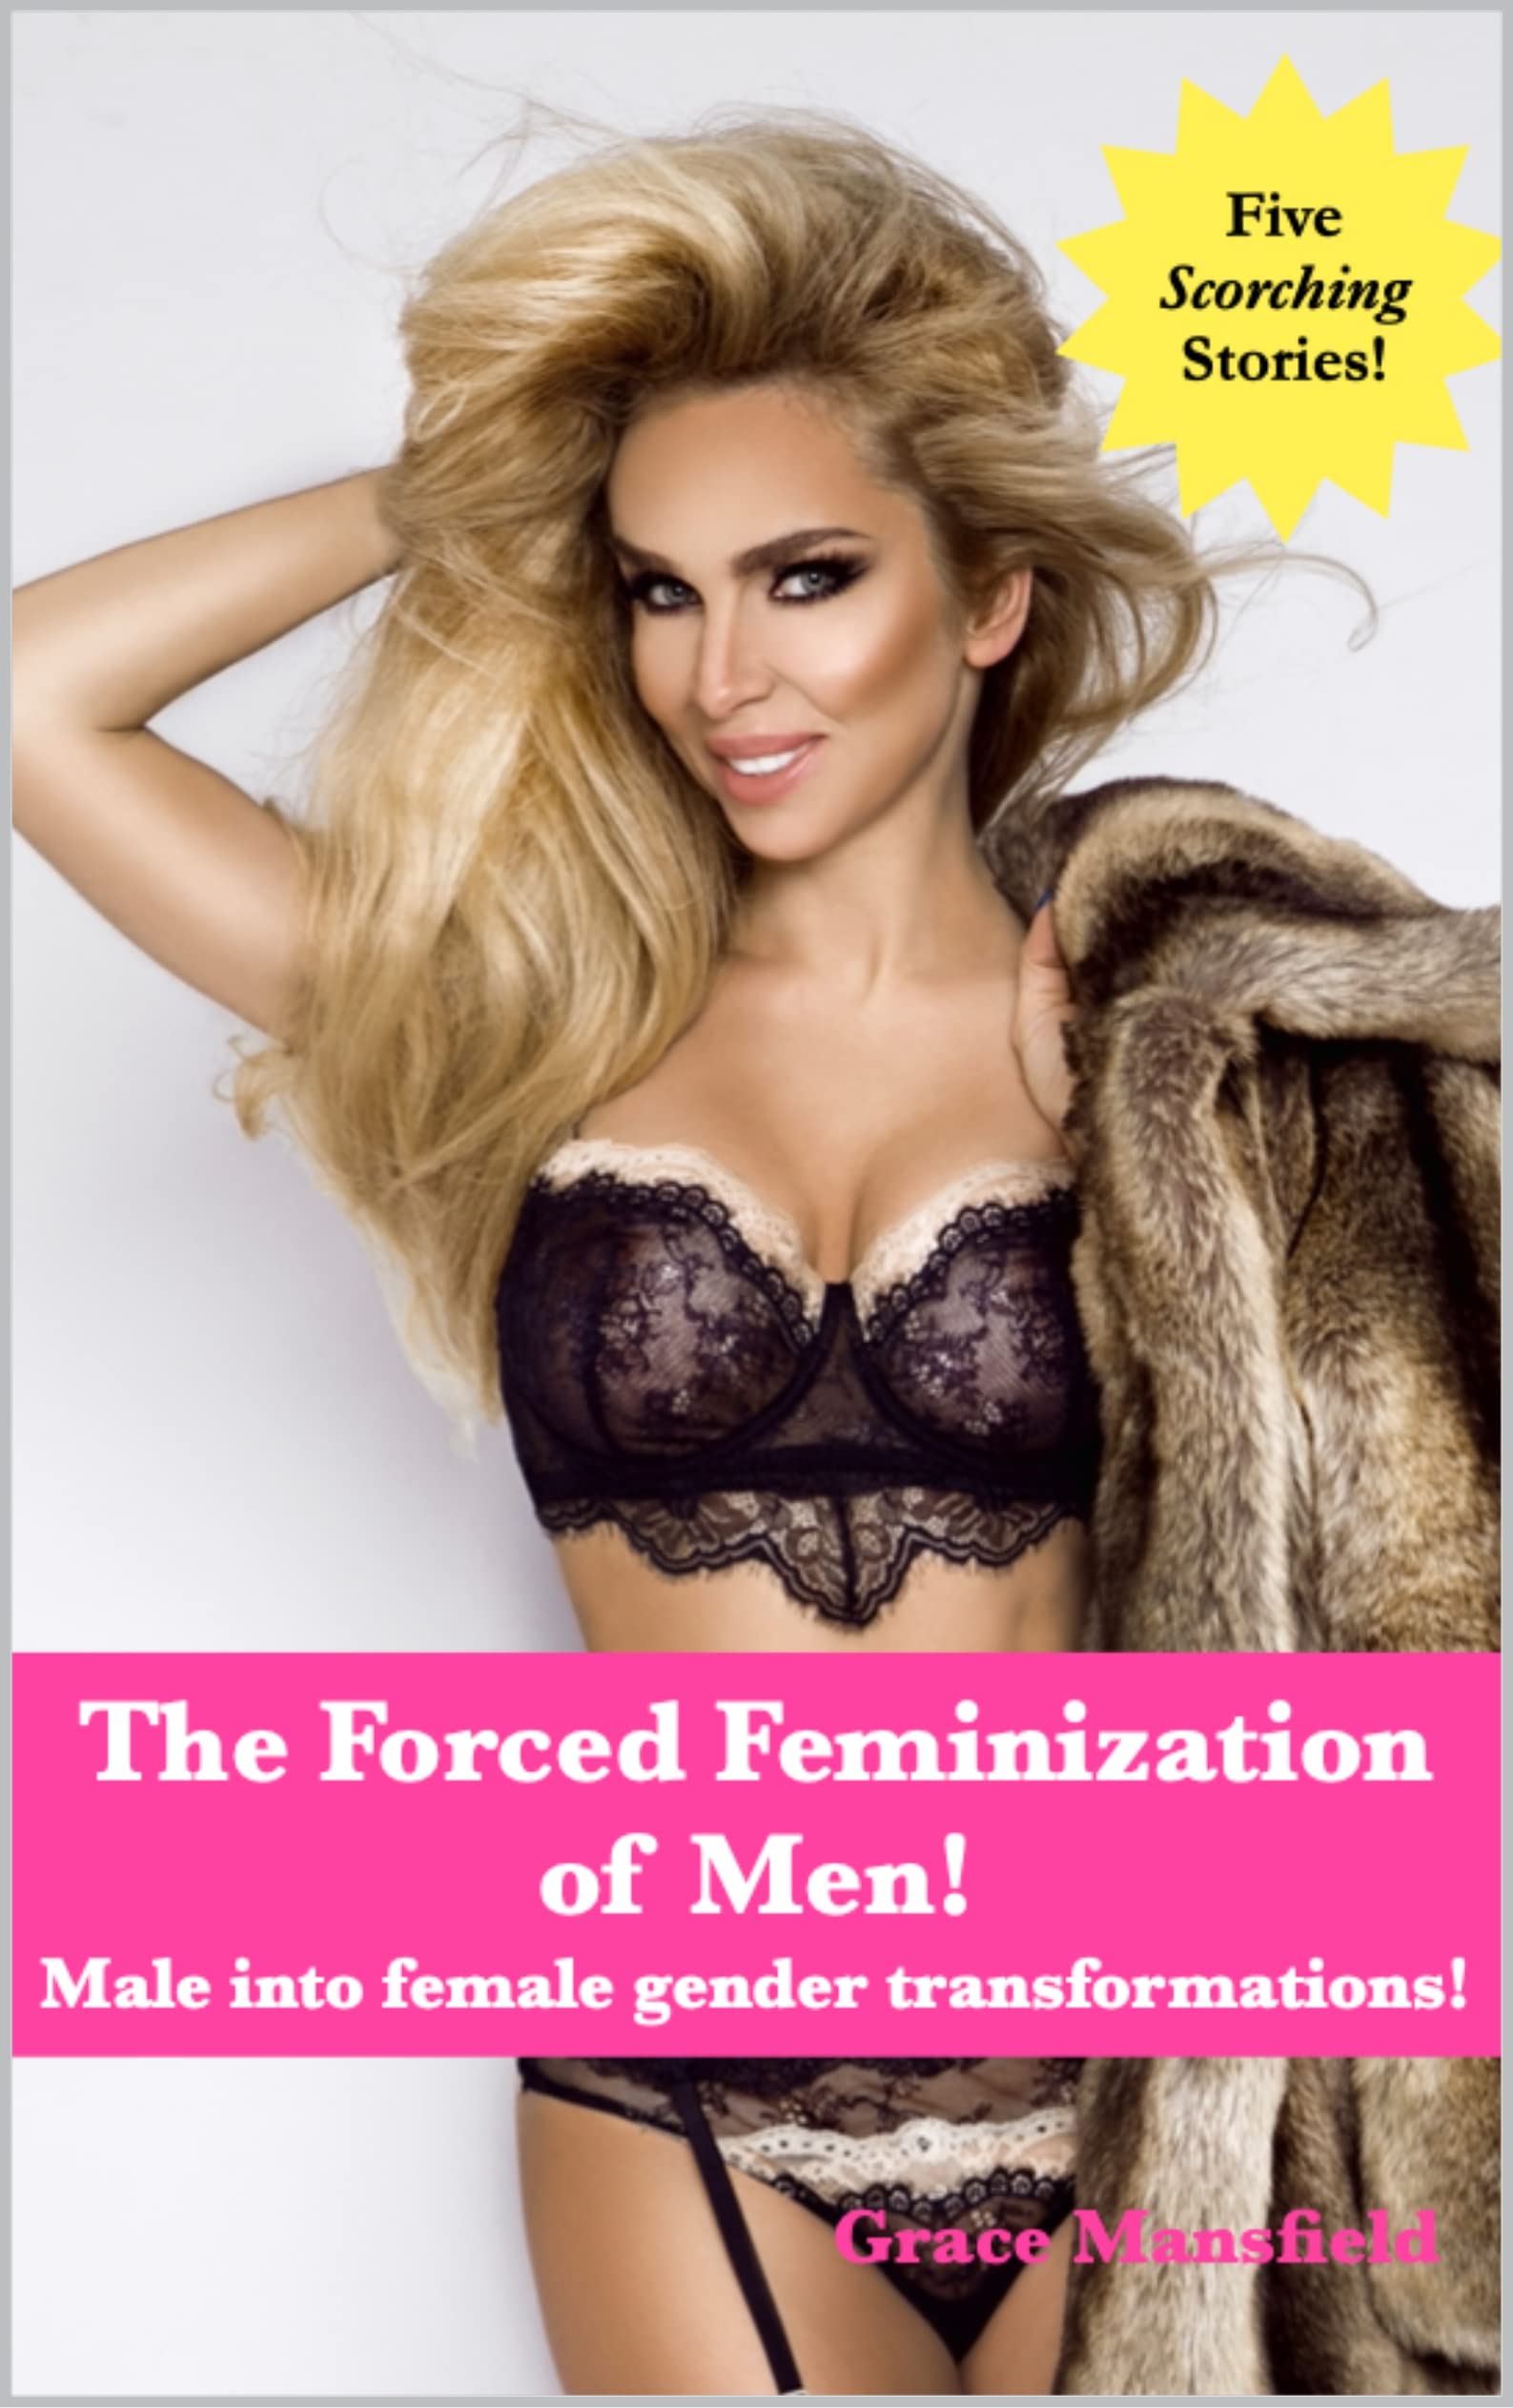 callie powell recommends Forced Feminization Erotic Stories